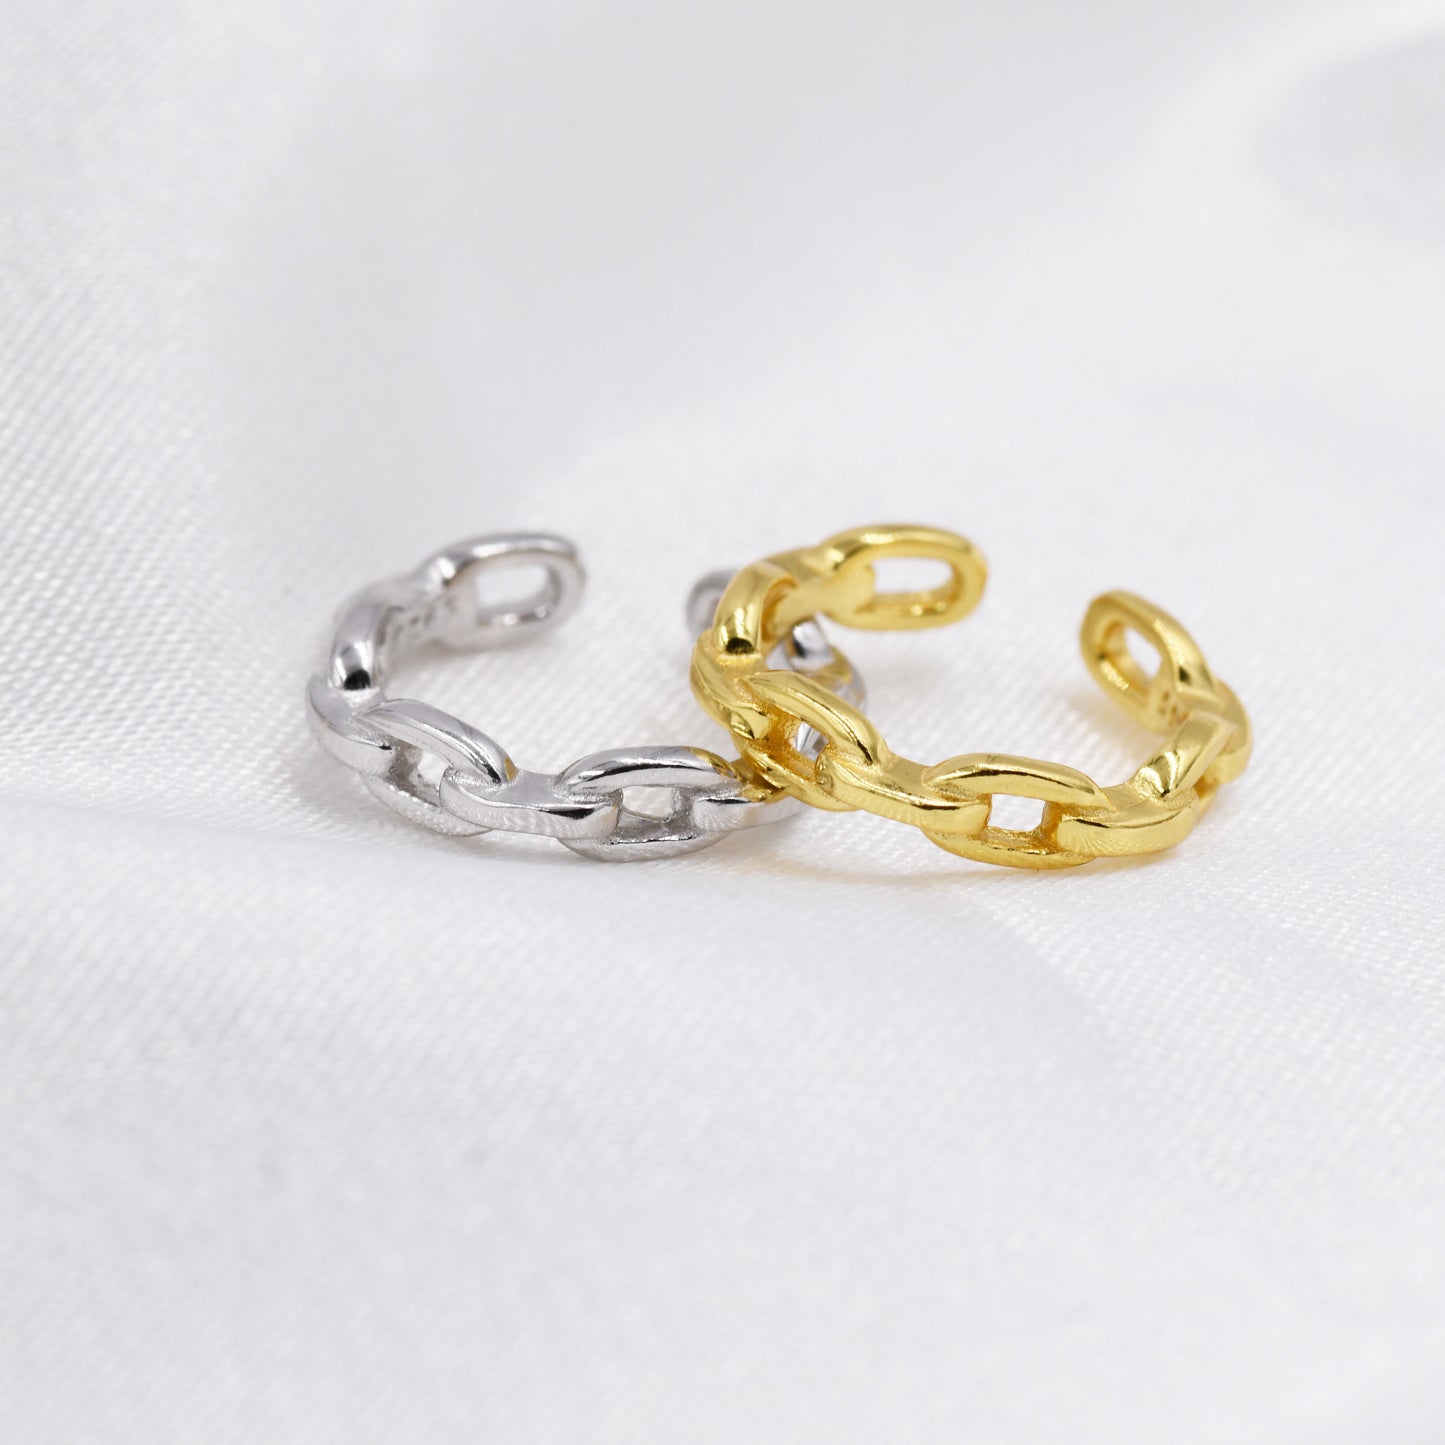 Chain Ear Cuff in Sterling Silver, Sold as a Single, Silver or Gold, Tiny Link Chain Ear Cuff, Piercing Free Earrings